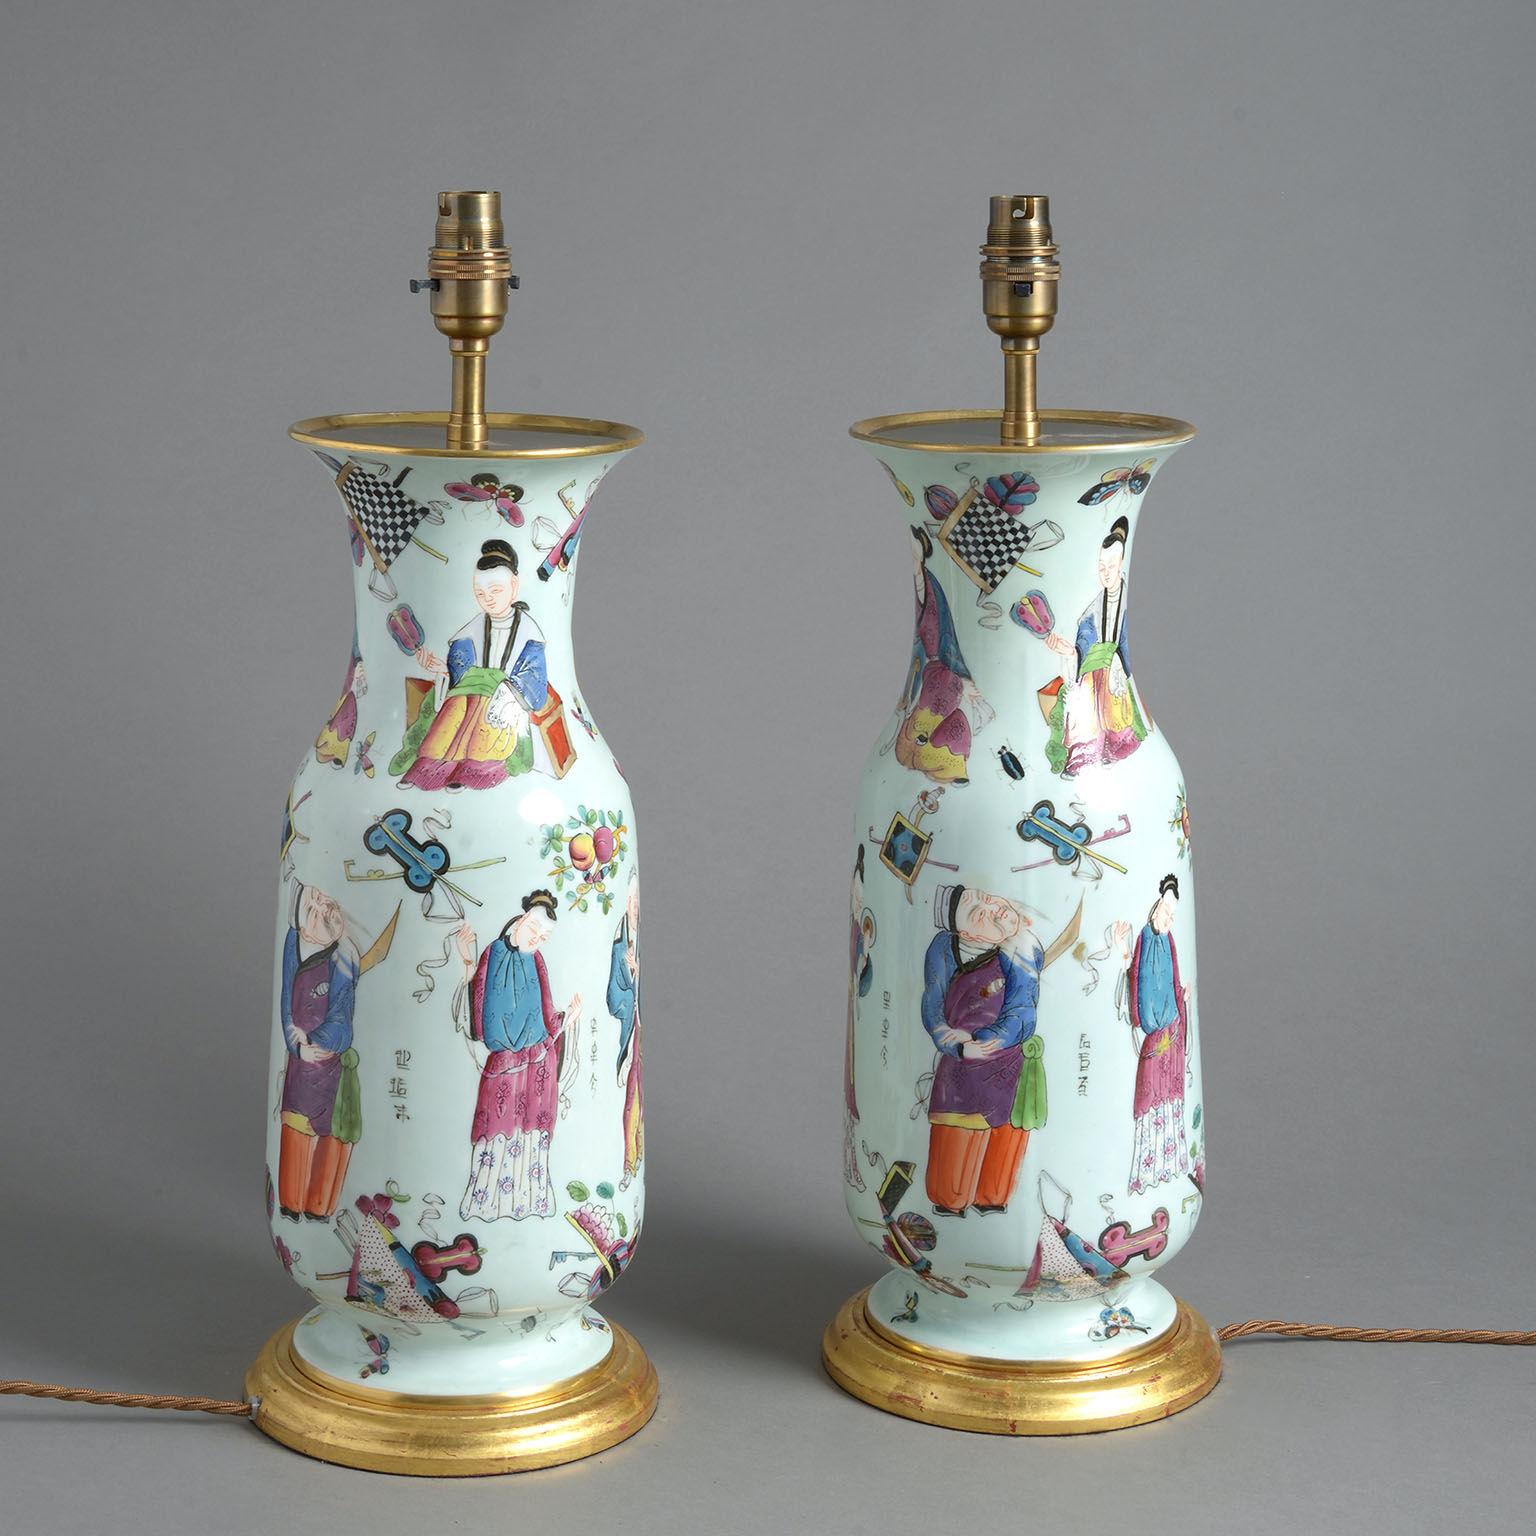 A pair of mid-19th century Chinoiserie Bayeux porcelain vases as lamps, the baluster shape decorated with all over chinoiserie figures on an ice-blue ground. Now converted as lamps.